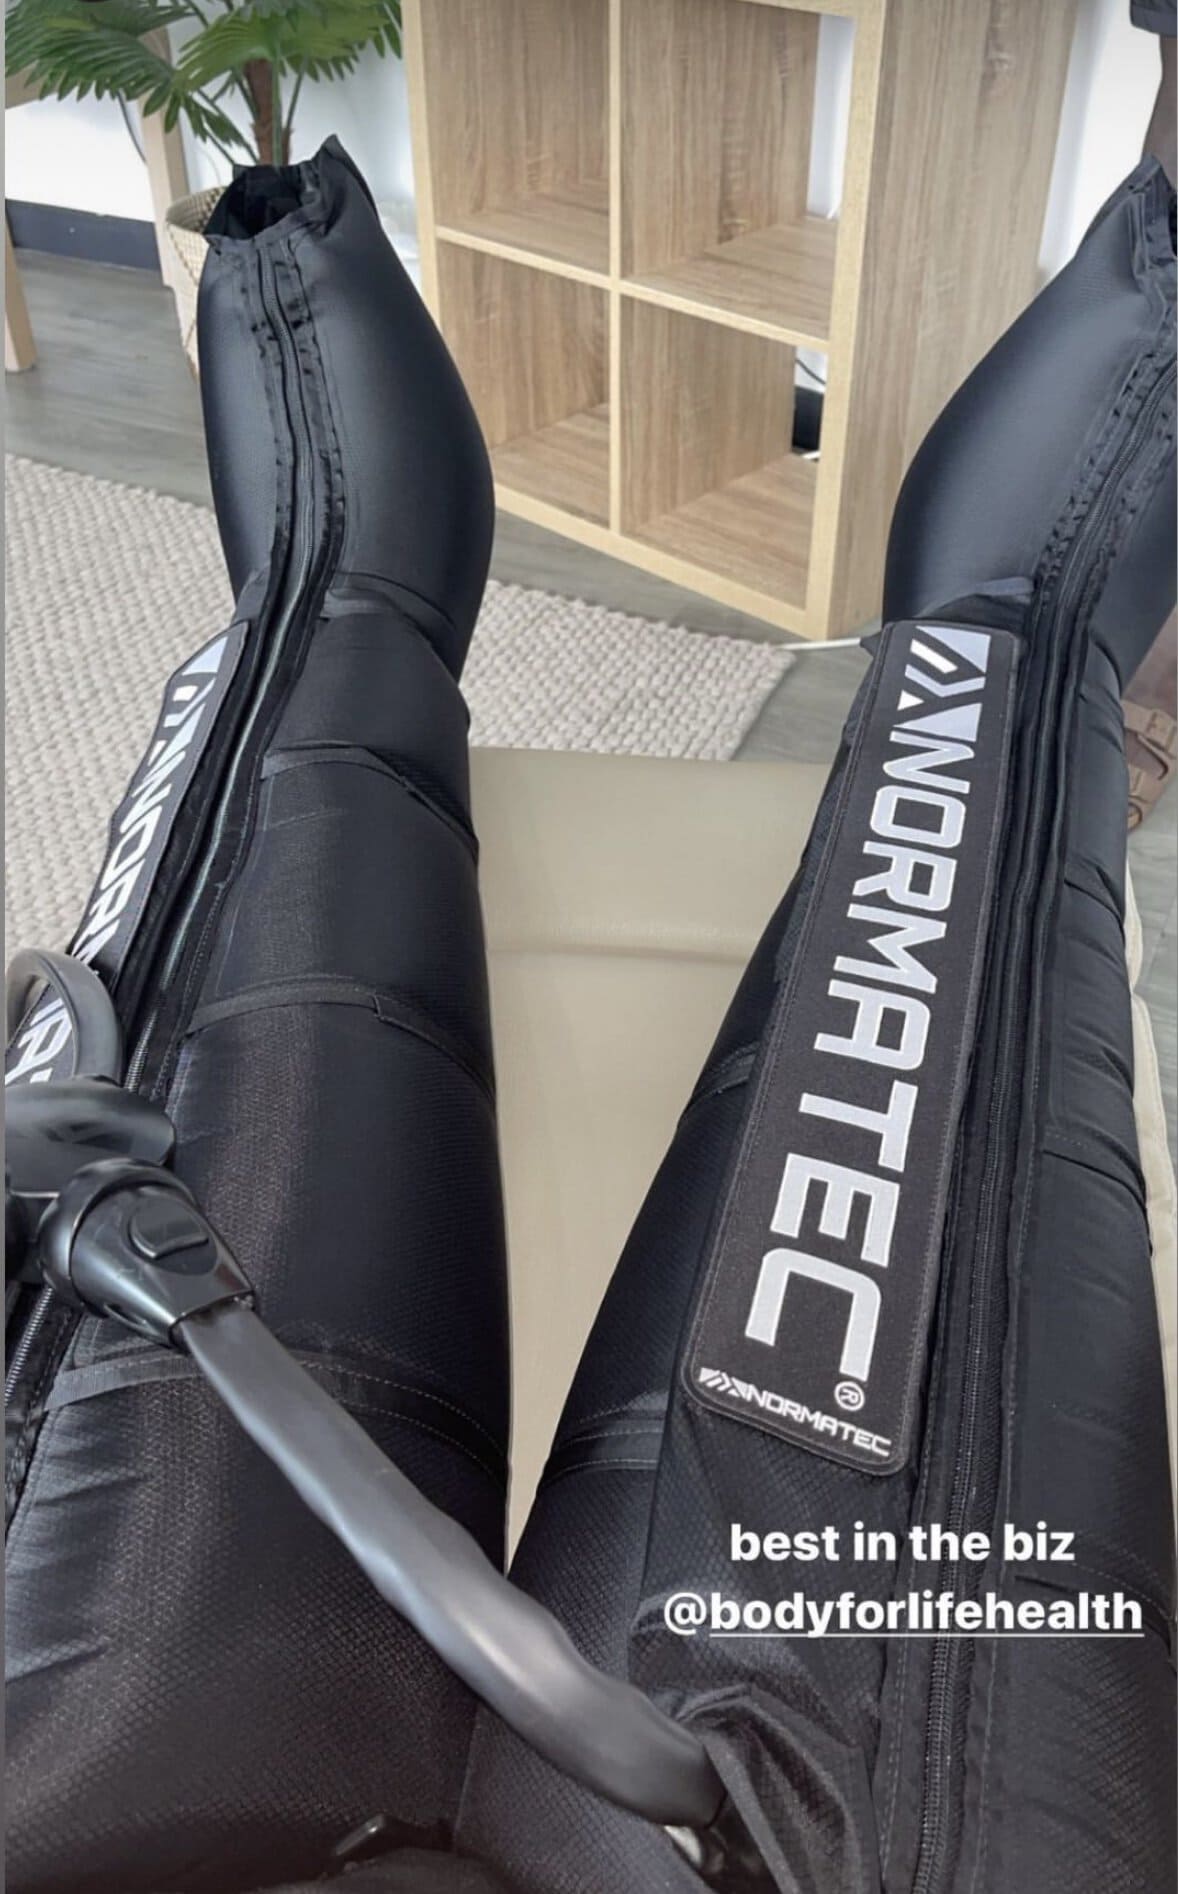 NormaTec boots laid out in front on a recliner chair